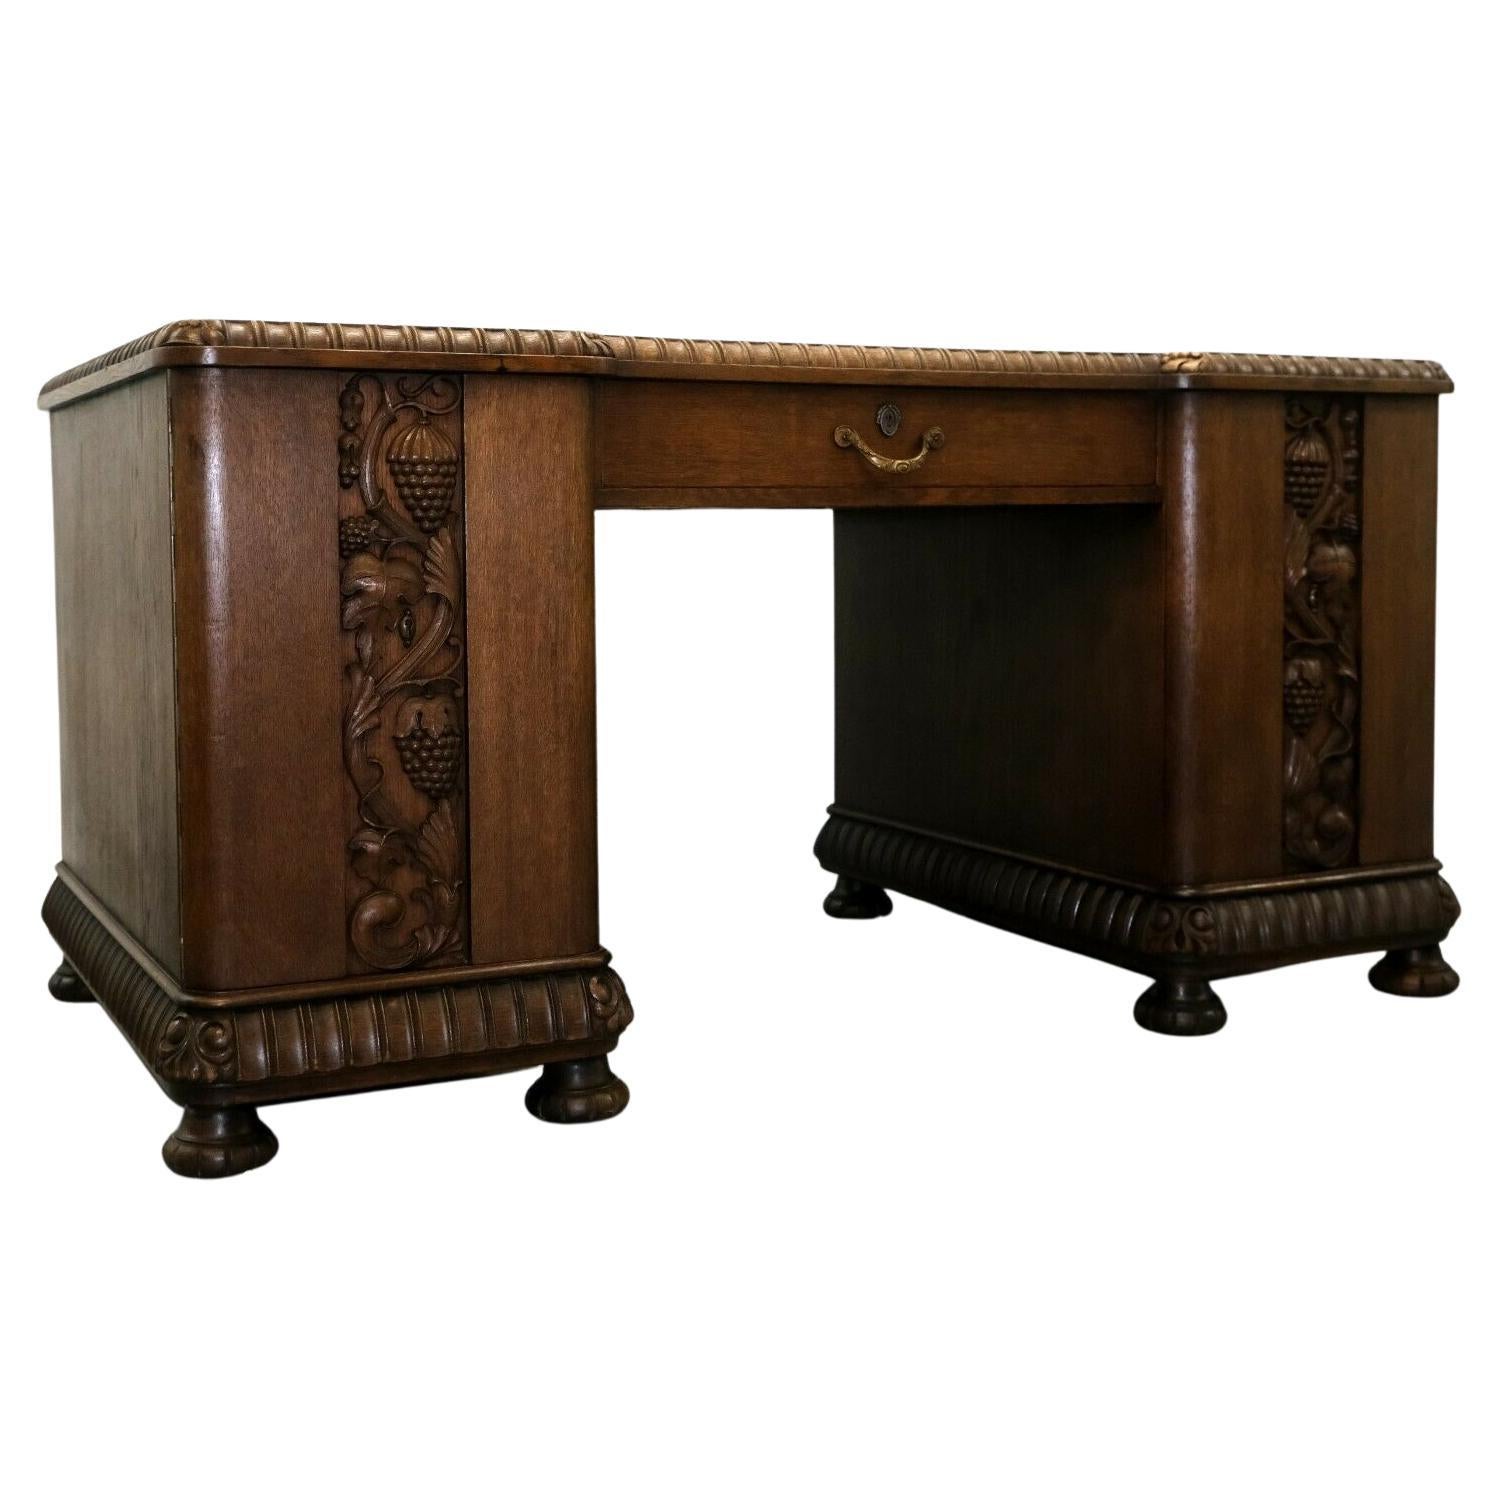 20th Century Oak Desk with Grapes and Vine Leaves Carvings & Sliding Shelves For Sale